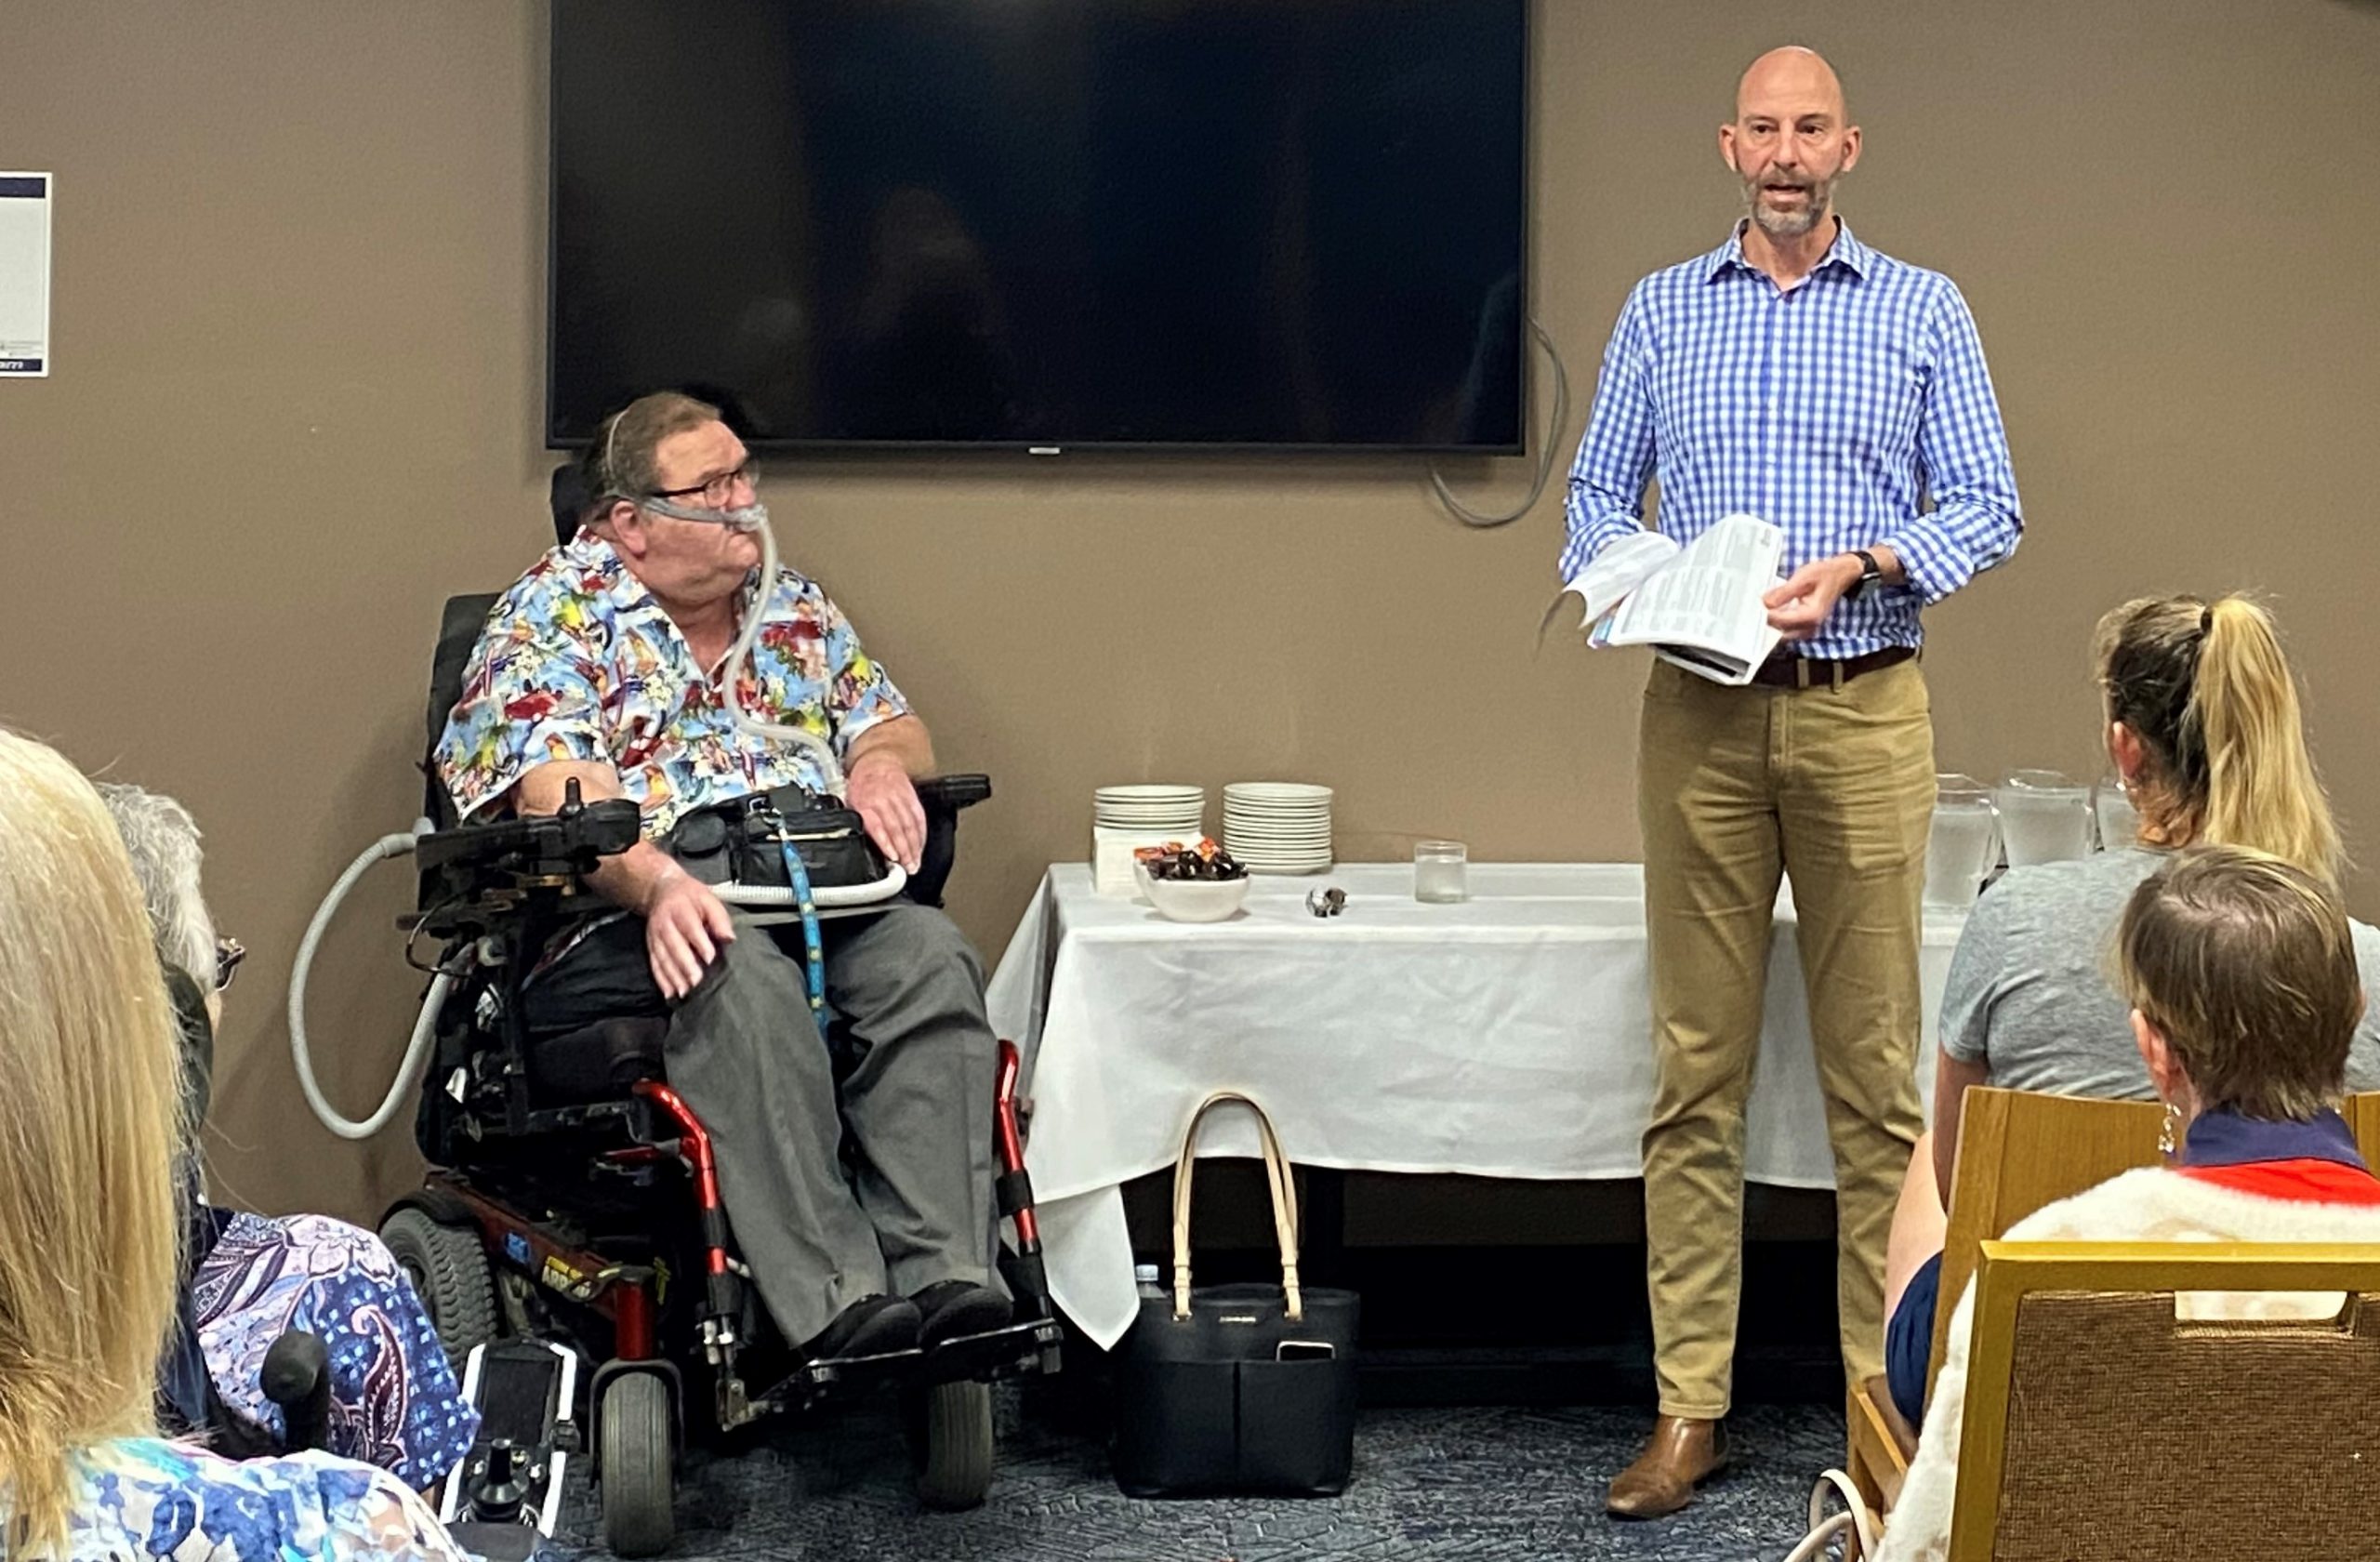 A man standing at the front of the room presenting. He is wearing a light blue long sleeved button up shirt and beige long pants. There is a man sitting in a wheelchair next to him. 